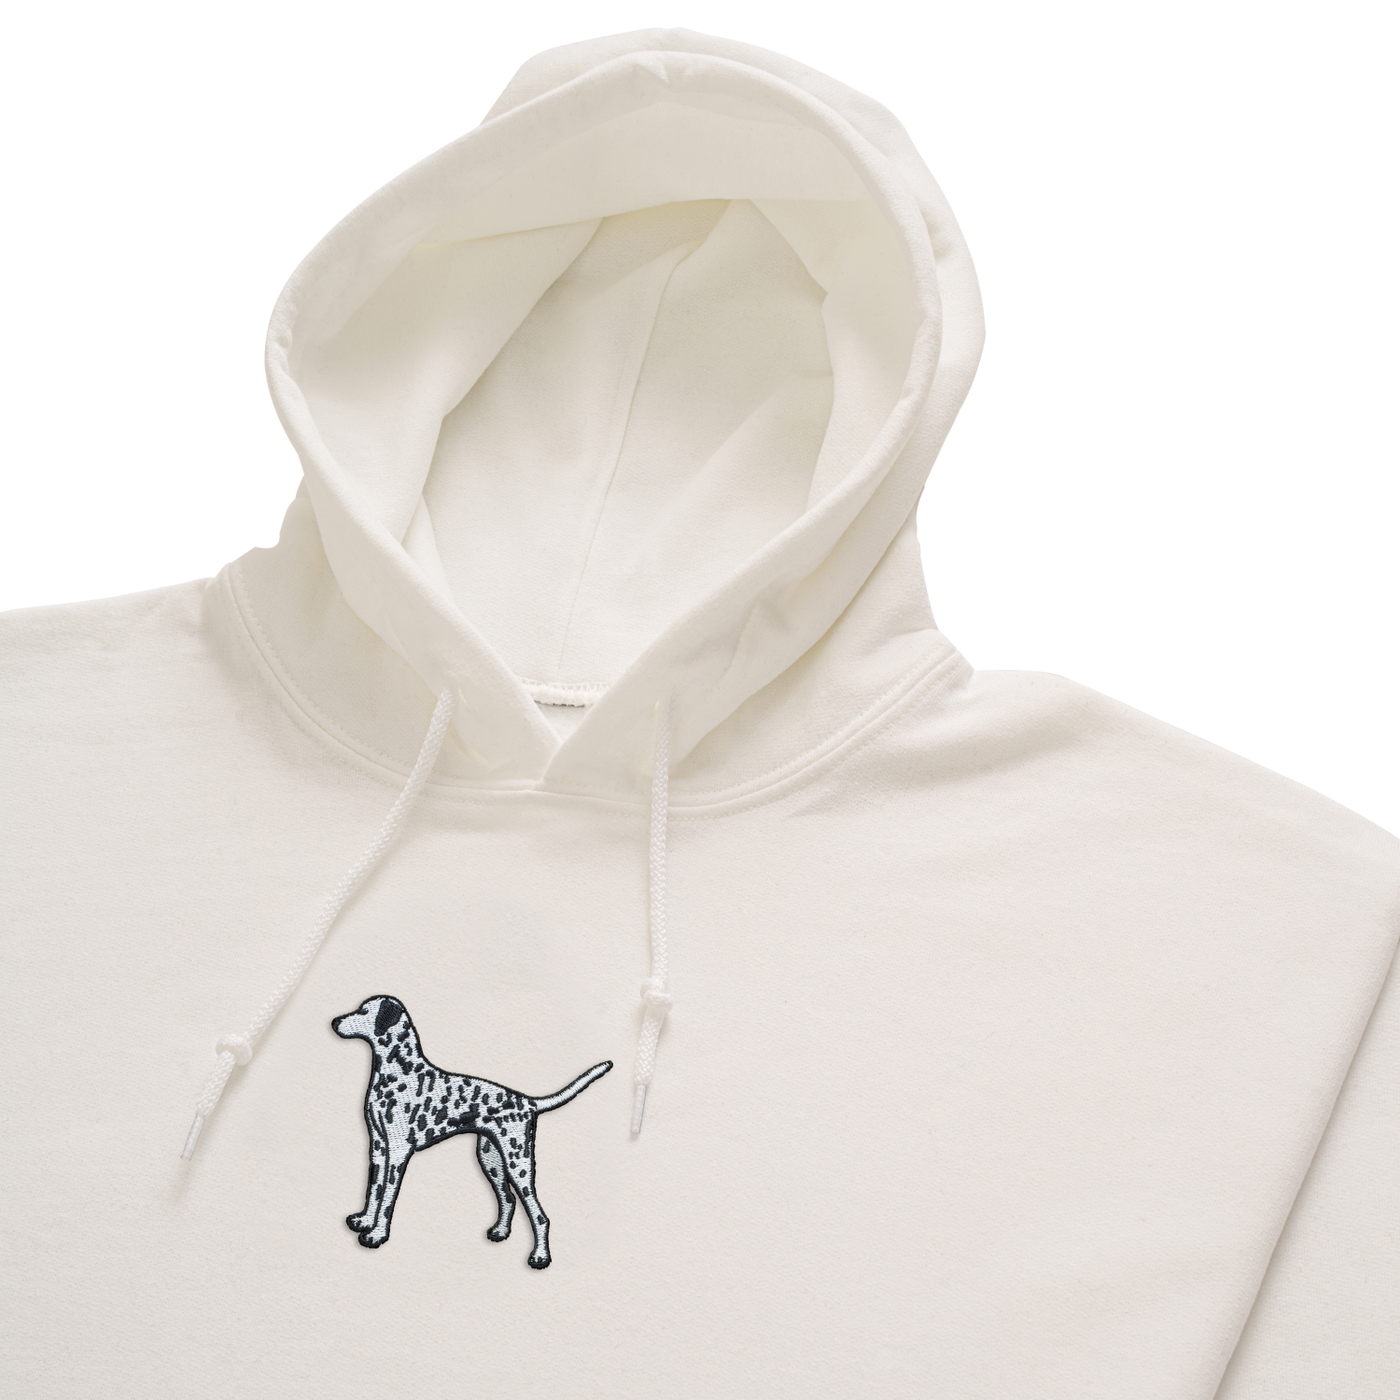 Bobby's Planet Men's Embroidered Dalmatian Hoodie from Paws Dog Cat Animals Collection in White Color#color_white